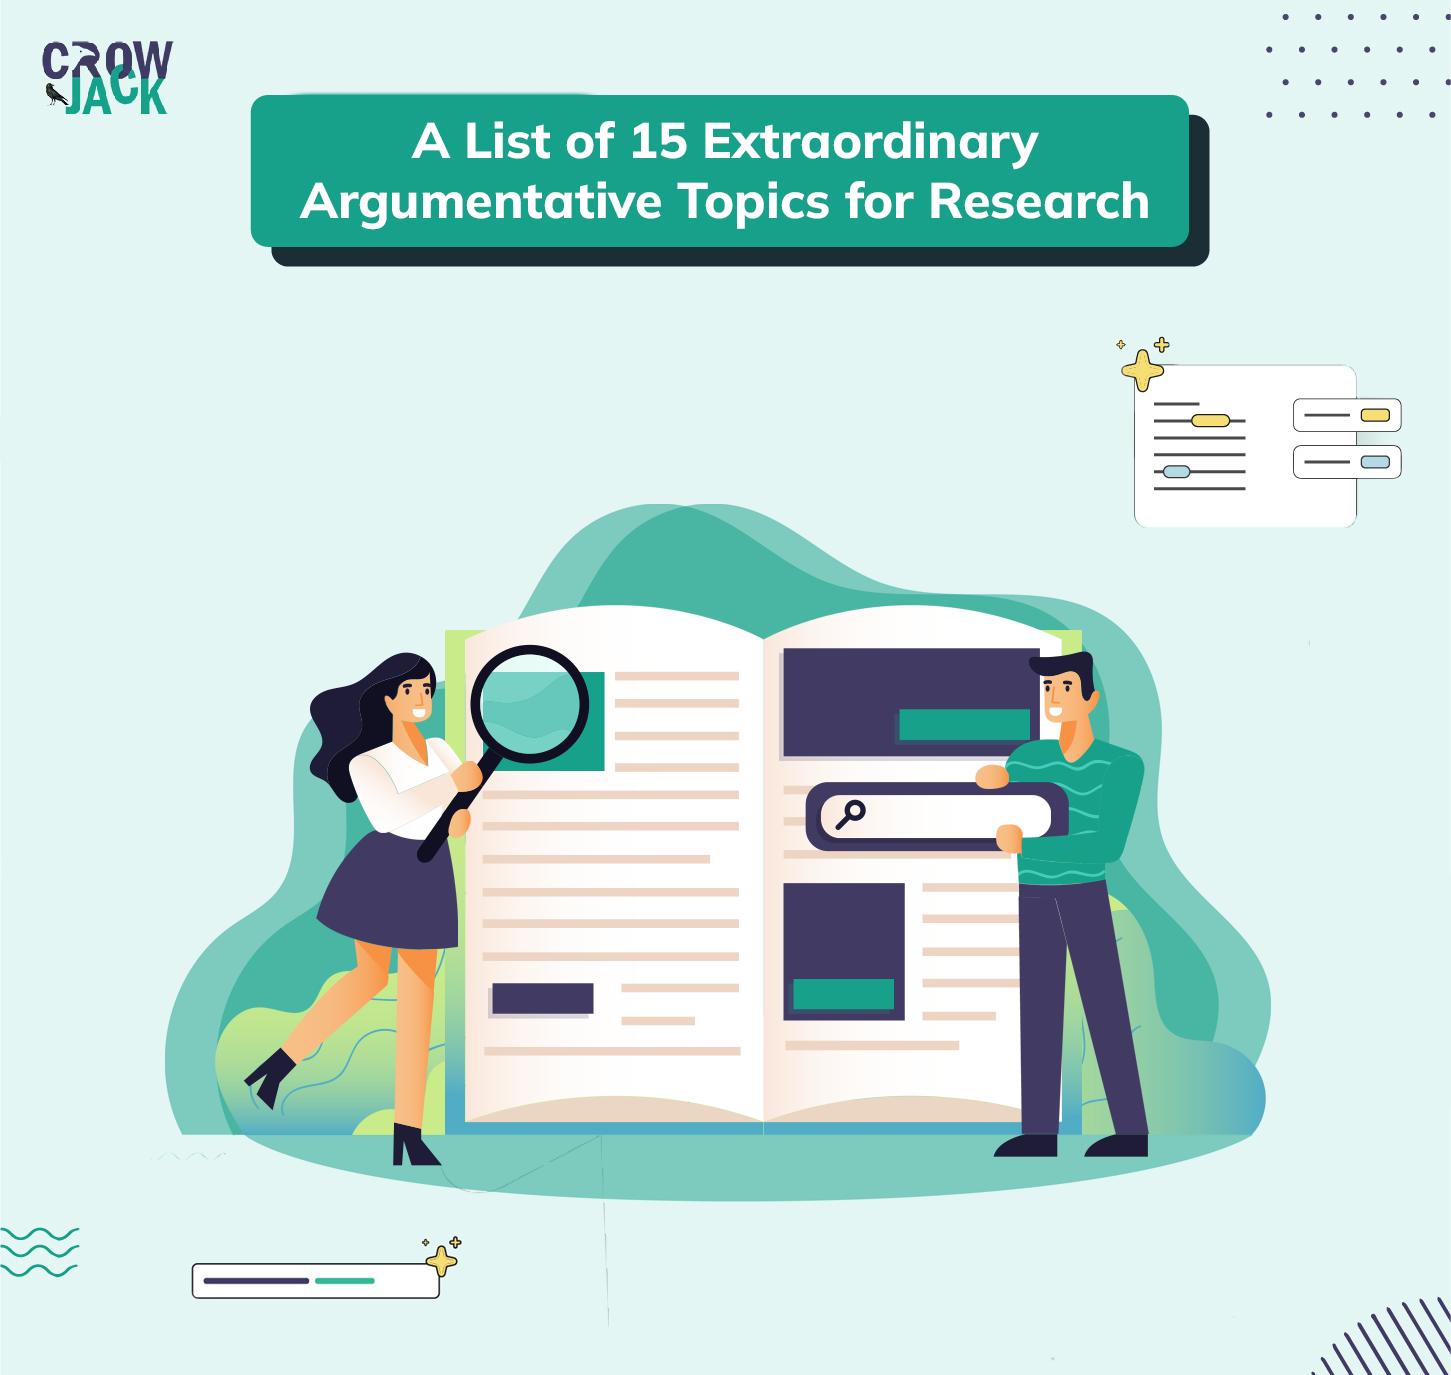 A List of 15 Extraordinary Argumentative Topics for Research - Featured Image